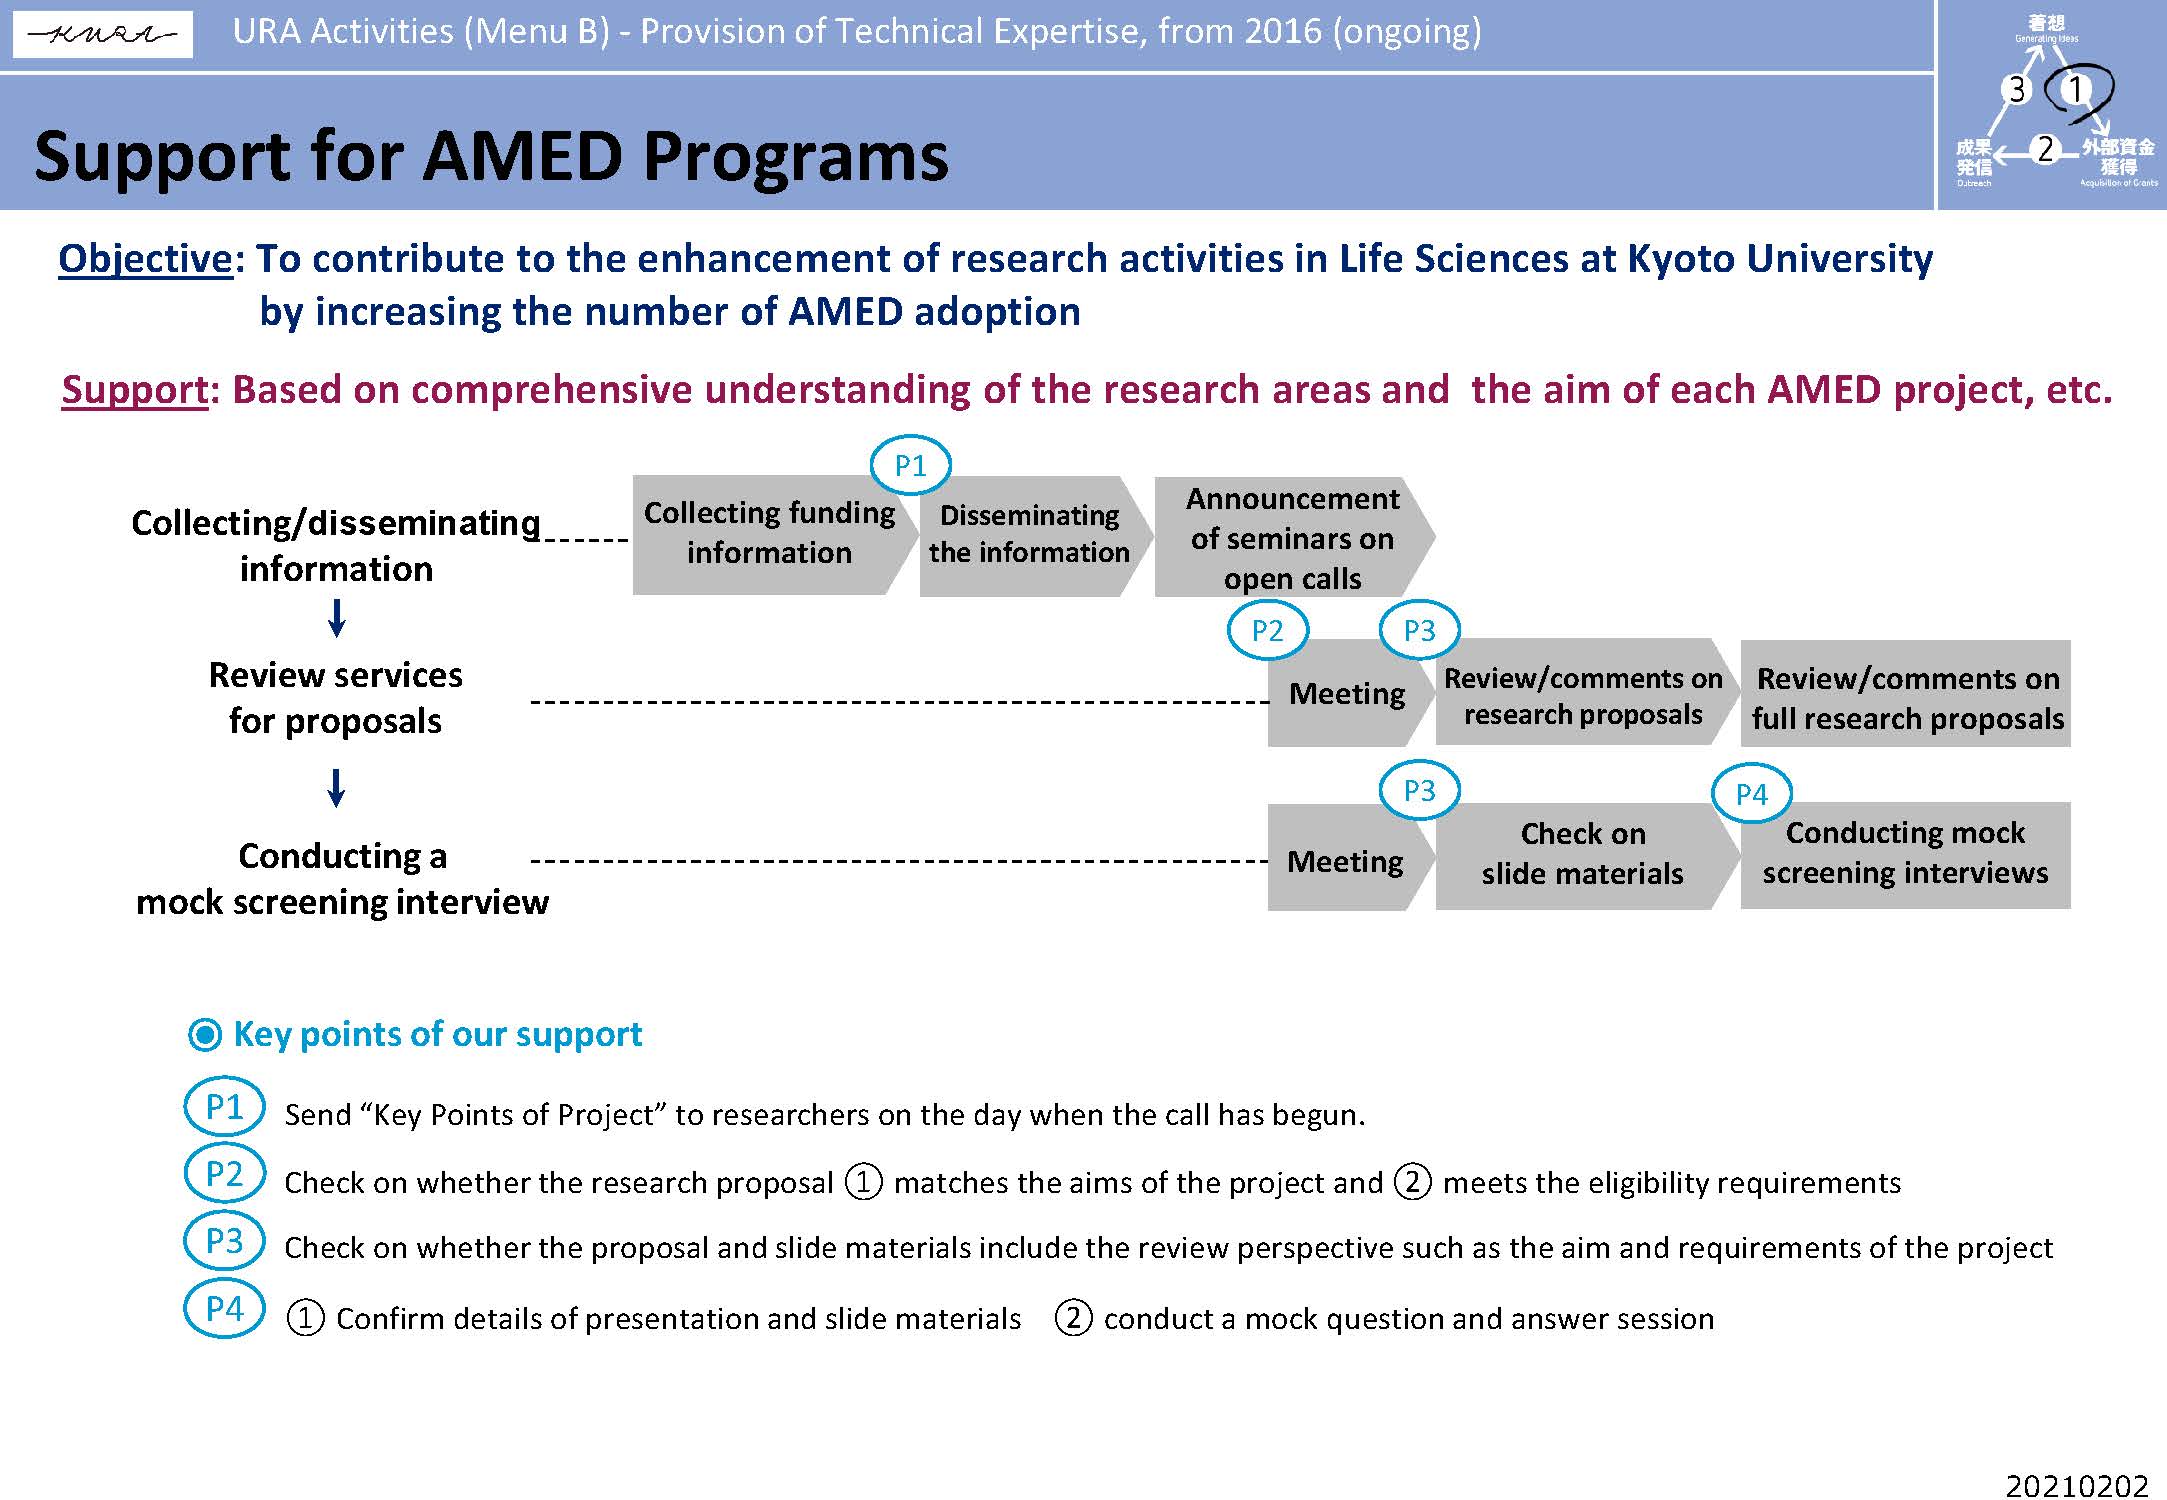 Support for AMED Programs